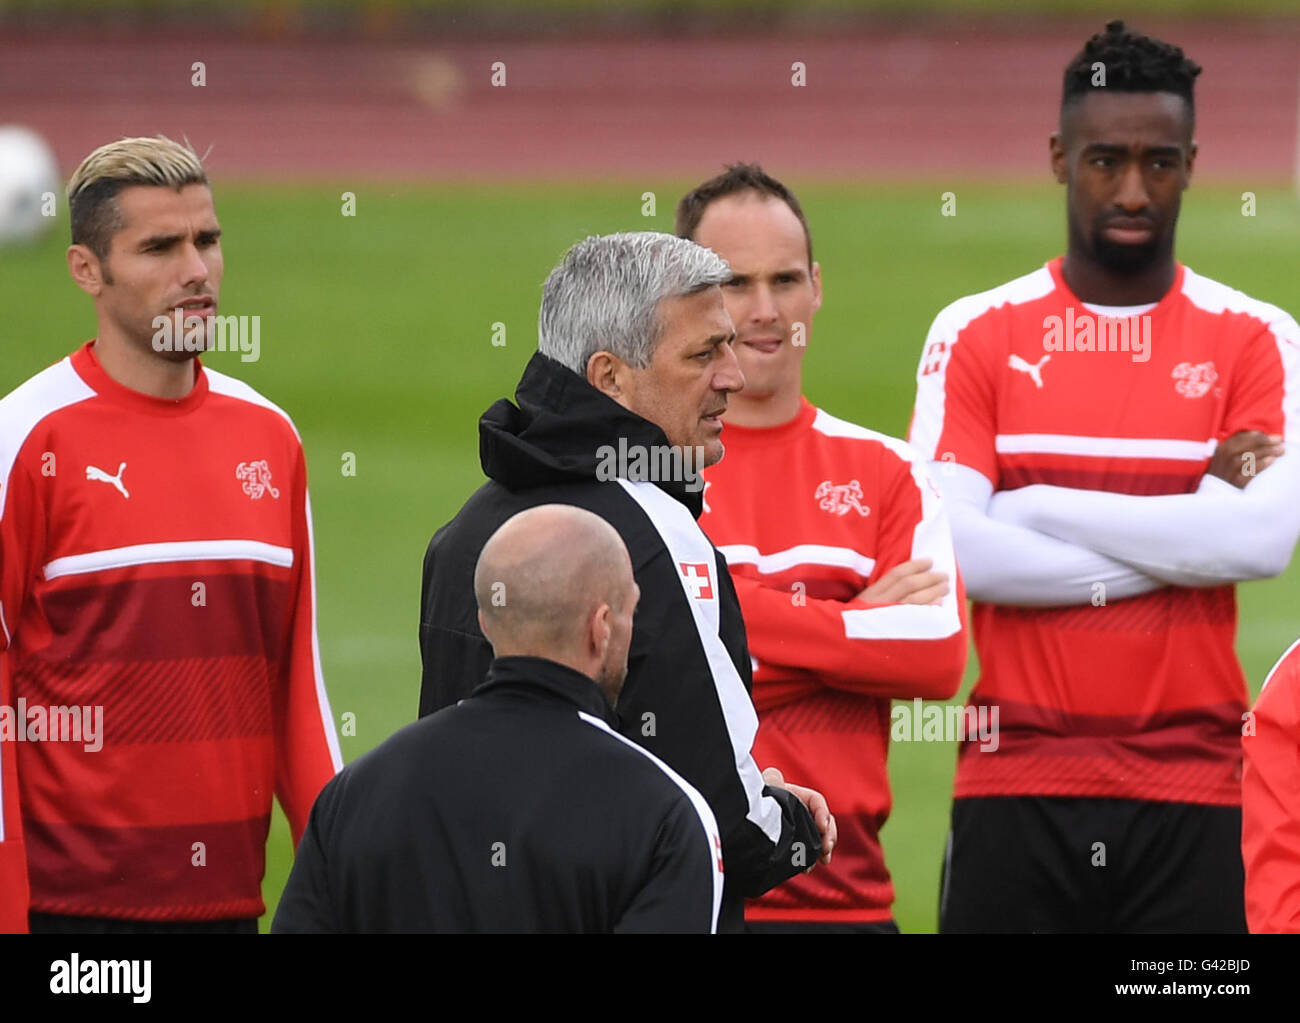 Coach Vladimir Petkovic (C) of Switzerland talks to his player with Valon Behrami (L) during a training session of team Switzerland at the Stadium Nord Lille Metropole in Villeneuve-d'Ascq, France, 18 June, 2016. Switzerland play France in a Euro 2016 group A soccer soccer match in Lille on 19 June. Photo: Marius Becker/dpa Stock Photo